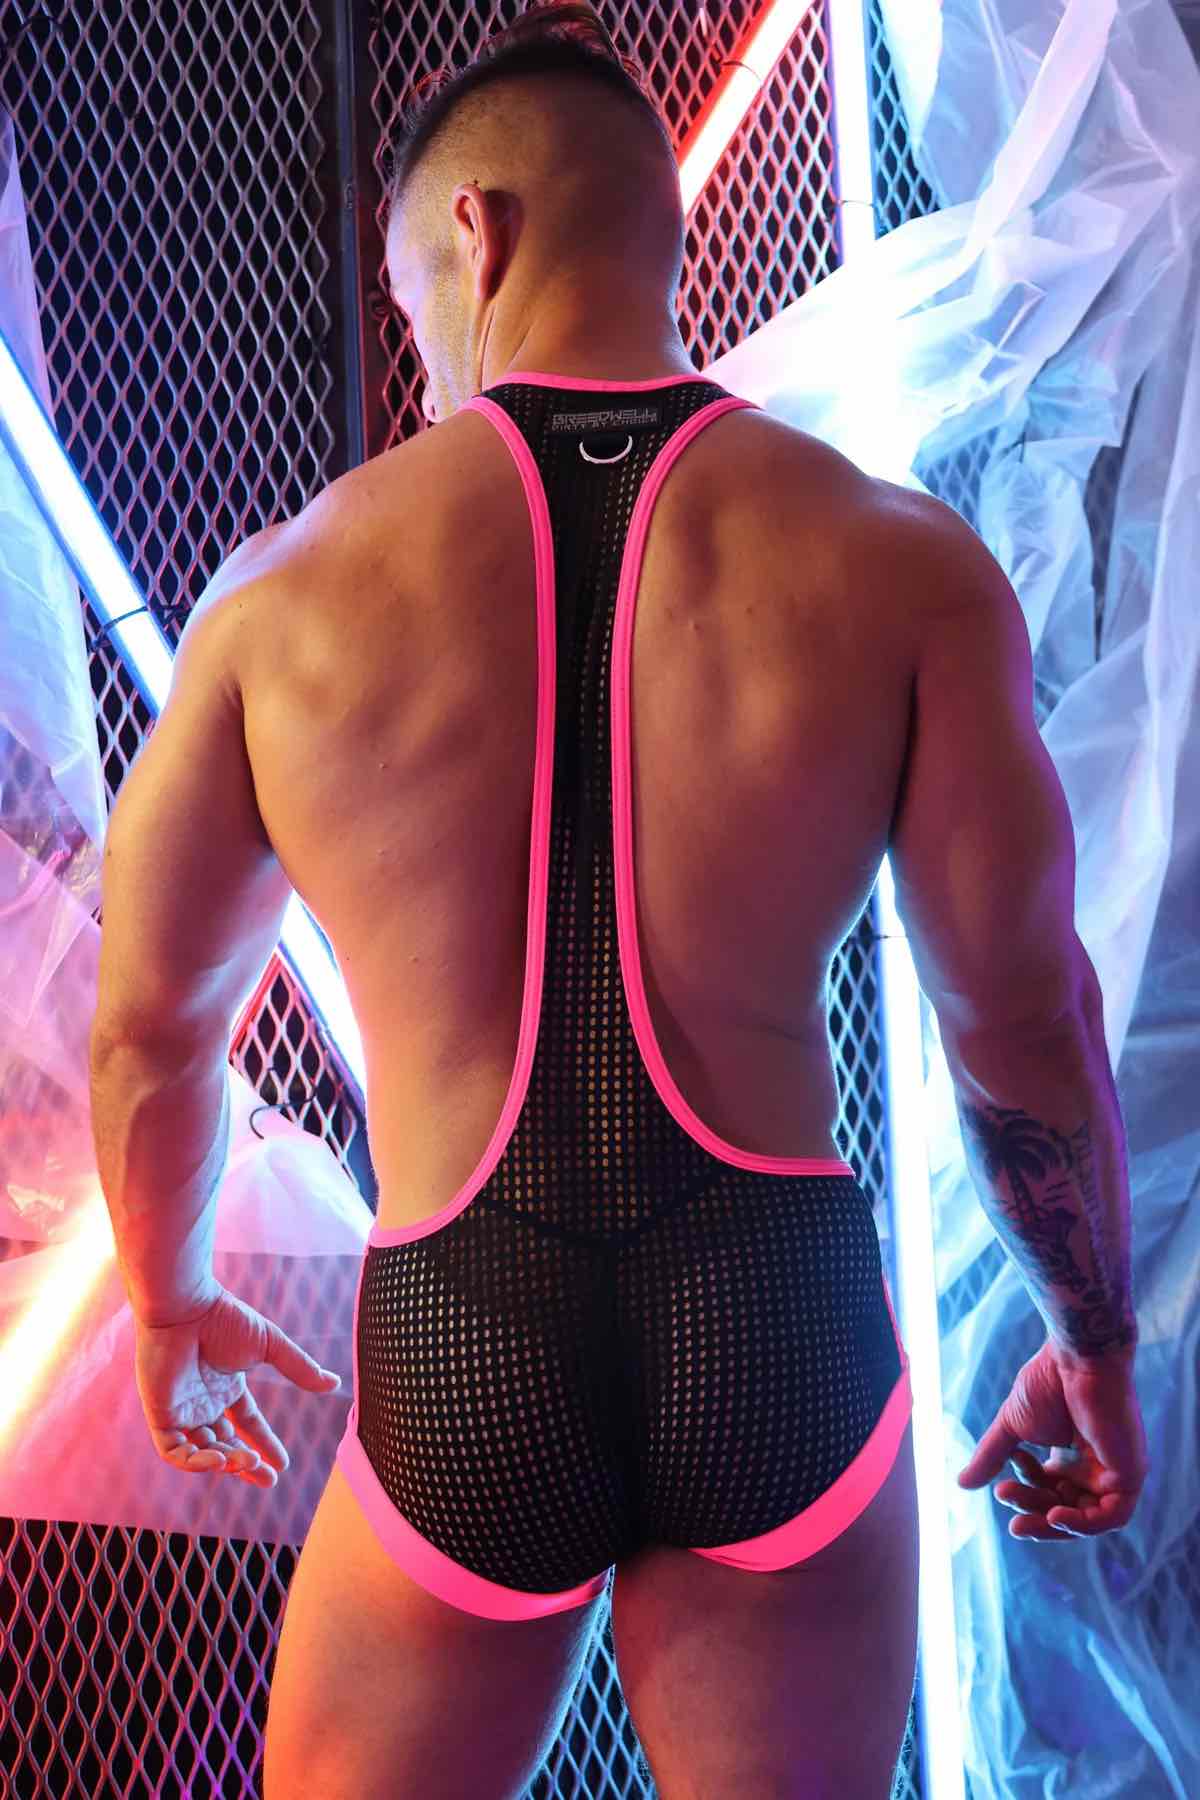 A model wearing the pink and black Dirty Boy Neon Trim Singlet against a fence lit with neon lights, rear view.